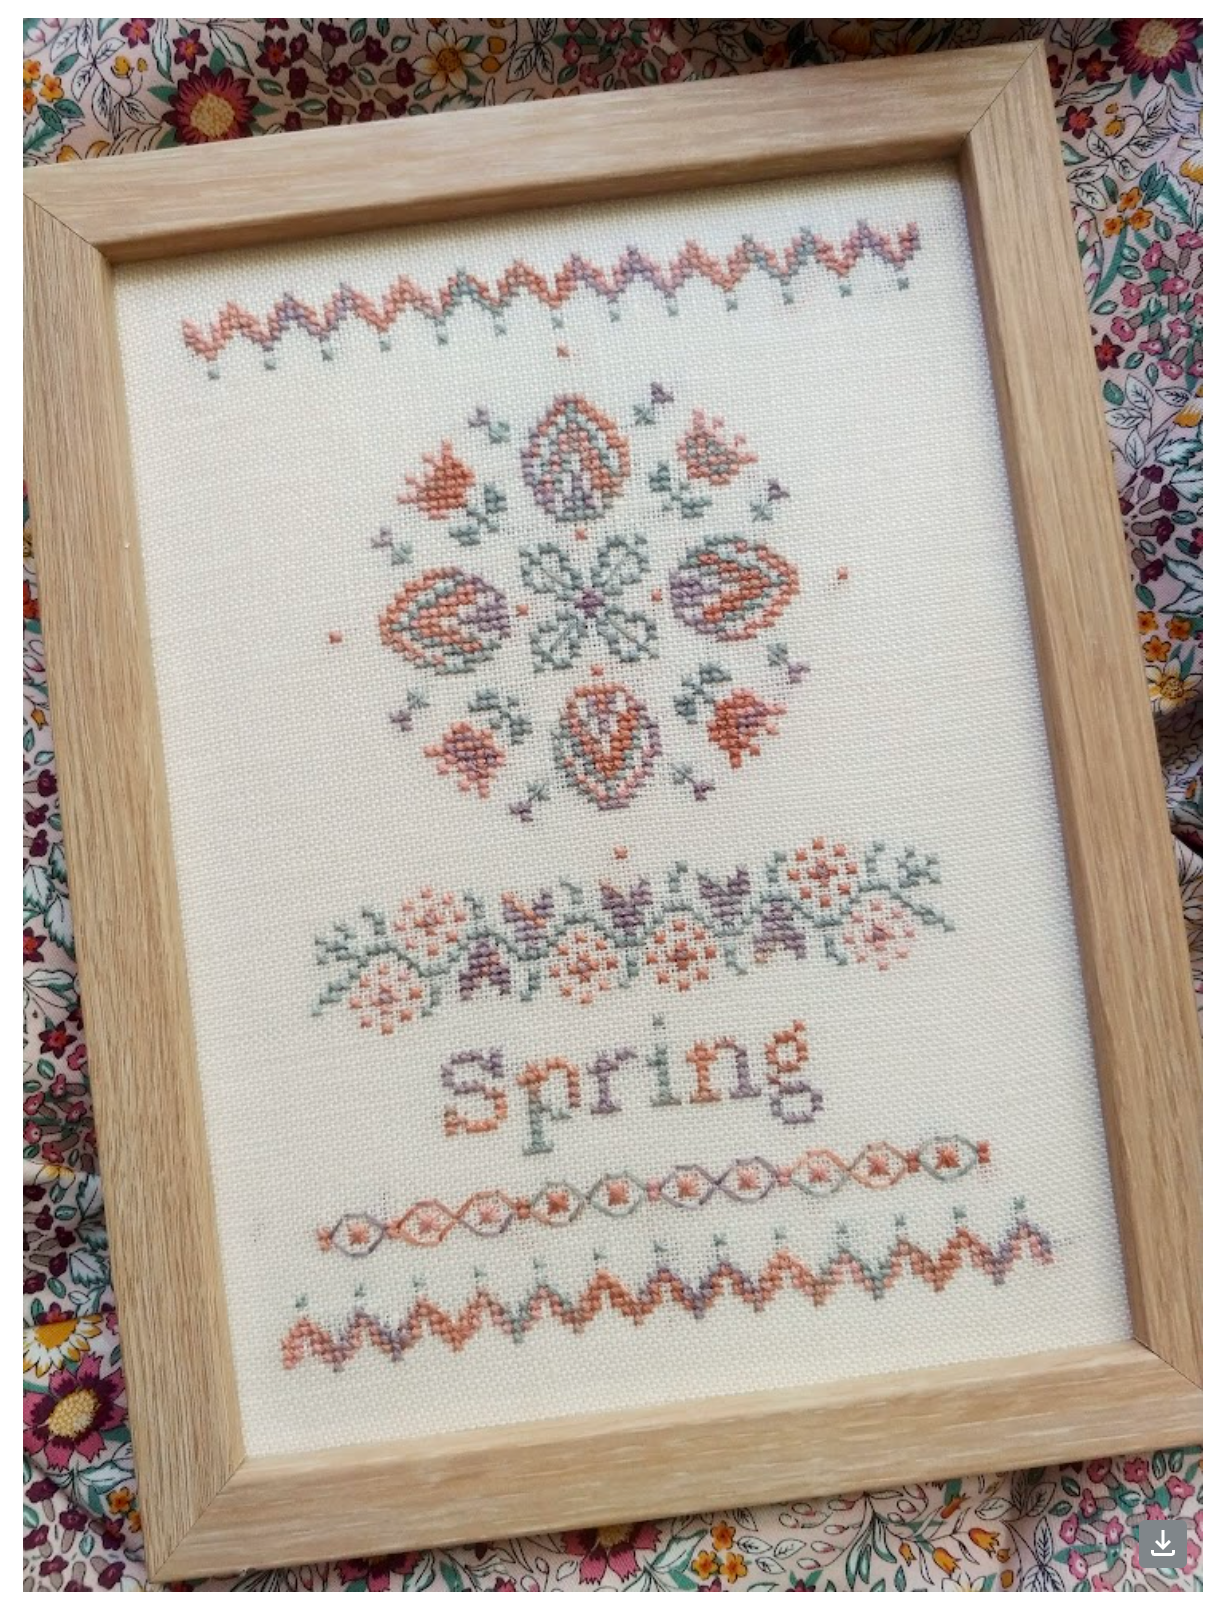 Spring: A Stitch for All Seasons